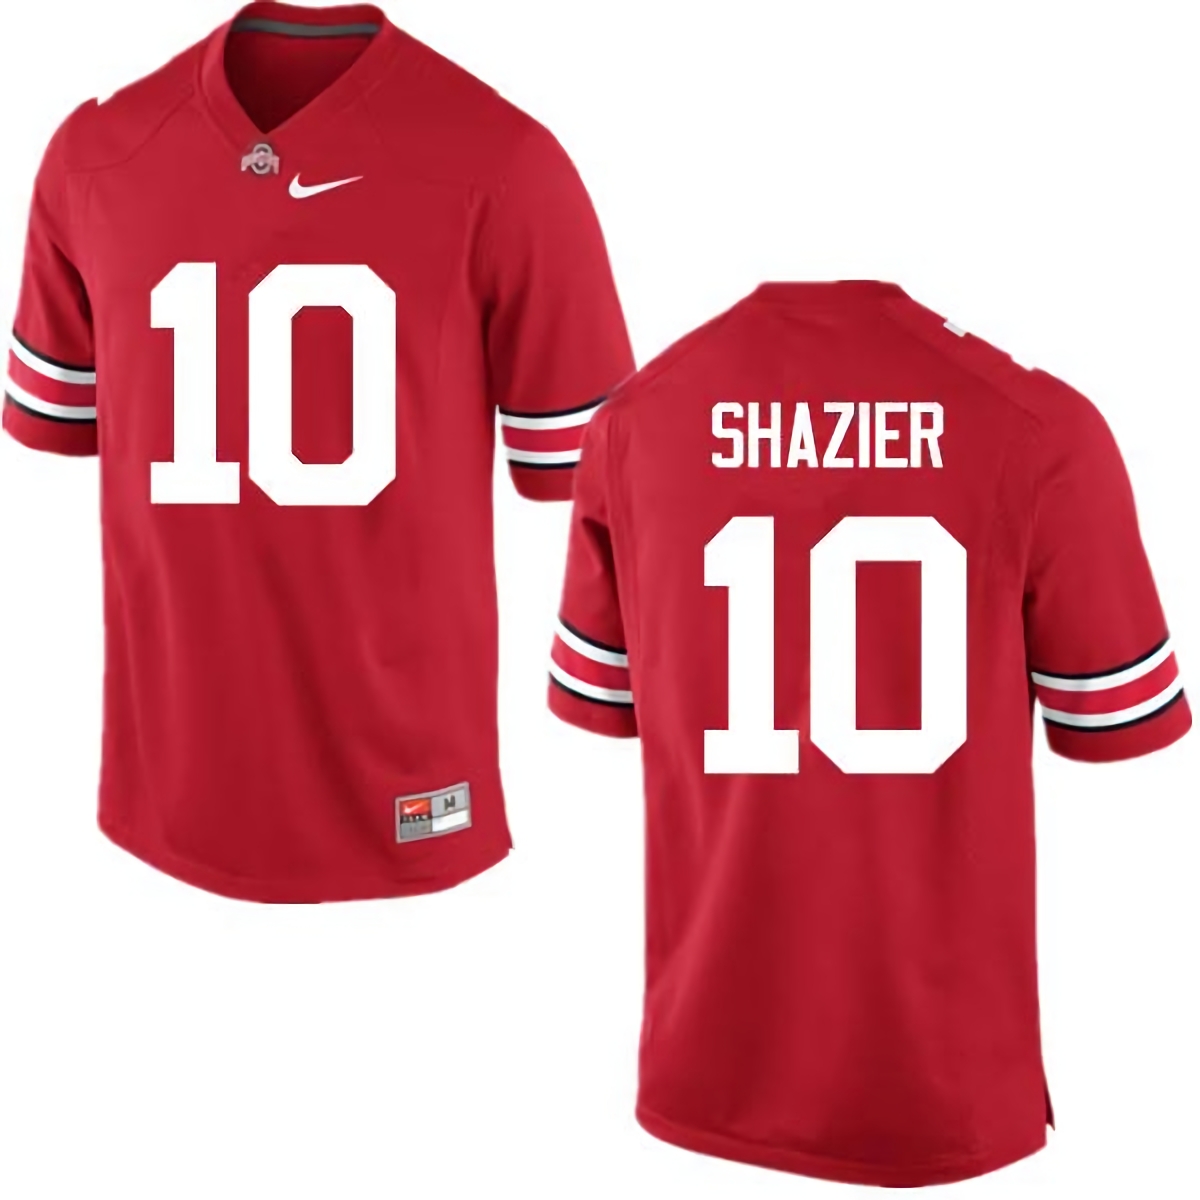 Ryan Shazier Ohio State Buckeyes Men's NCAA #10 Nike Red College Stitched Football Jersey WKP8256FL